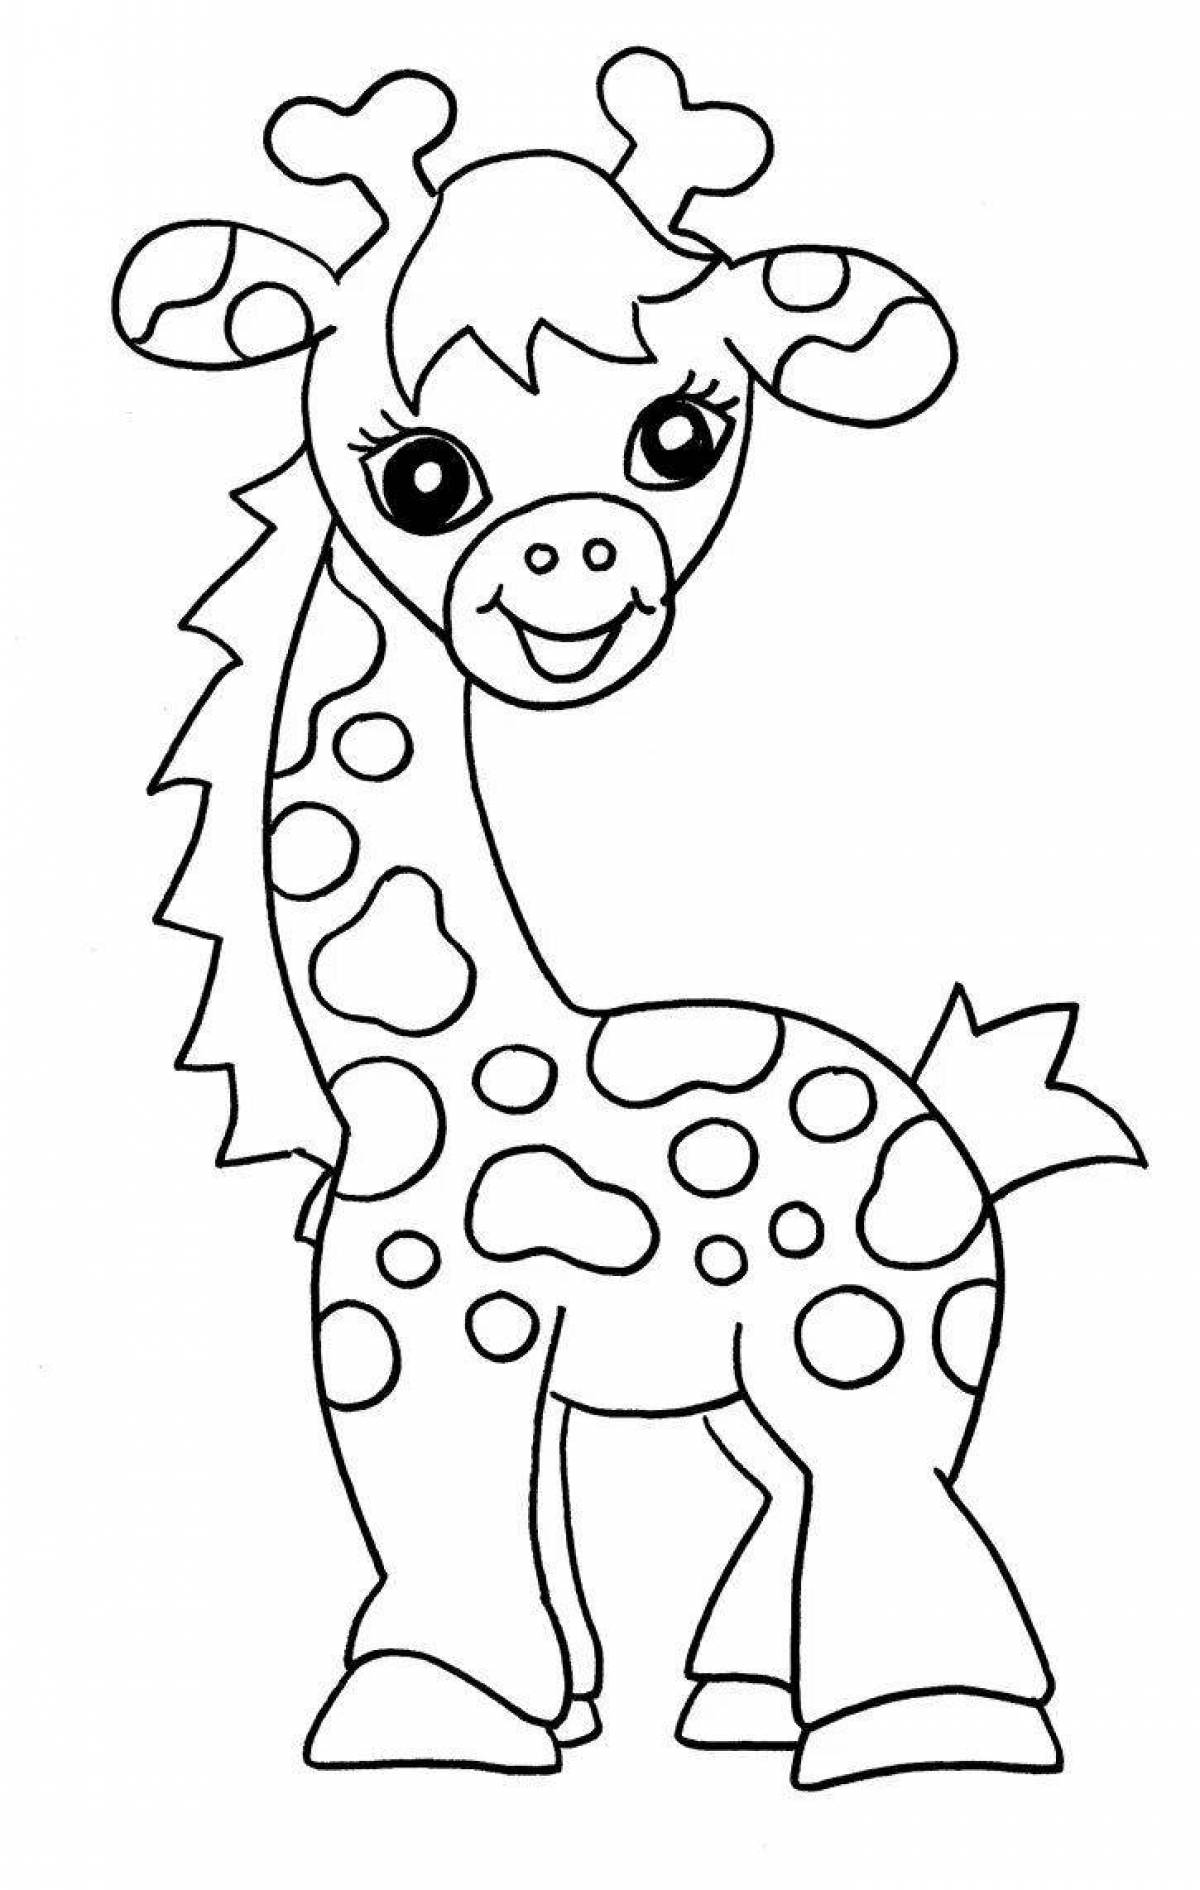 Giraffe coloring page for kids